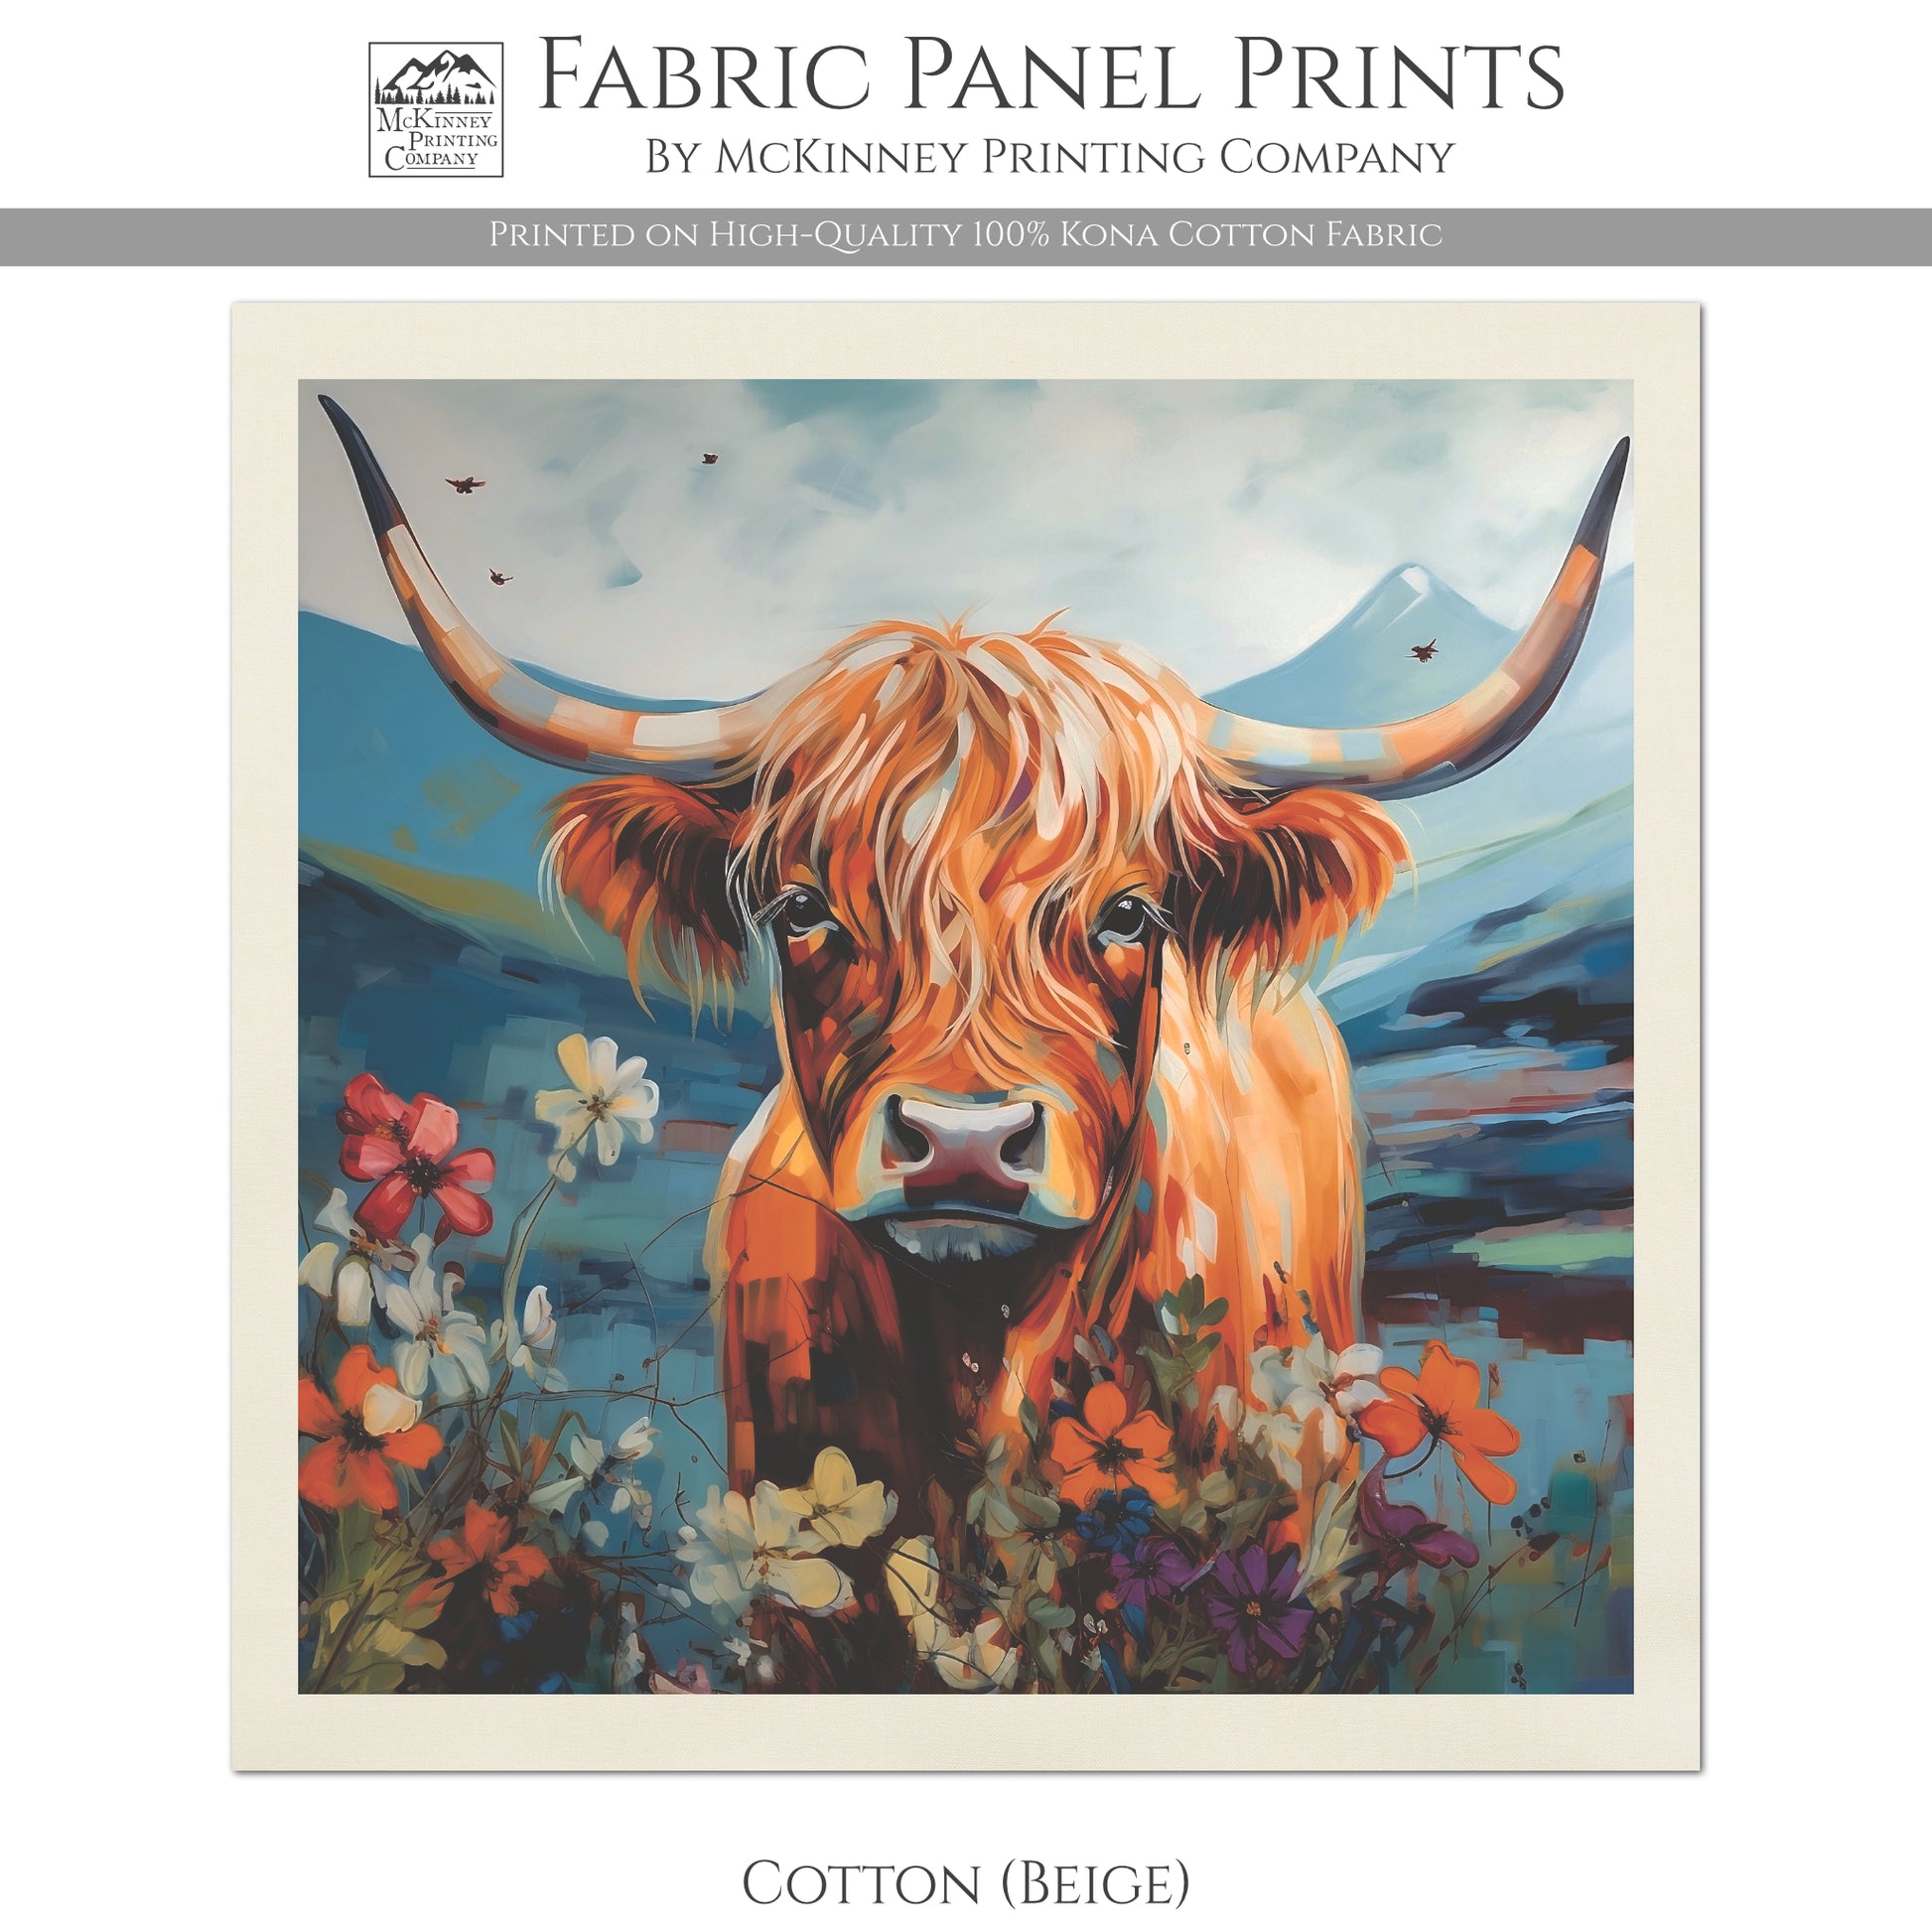 Highland Cow Print, Mountain Landscape, Floral, Flower, Quilt, Quilting, Sewing, Crafts, Home Decor - Kona Cotton Fabric